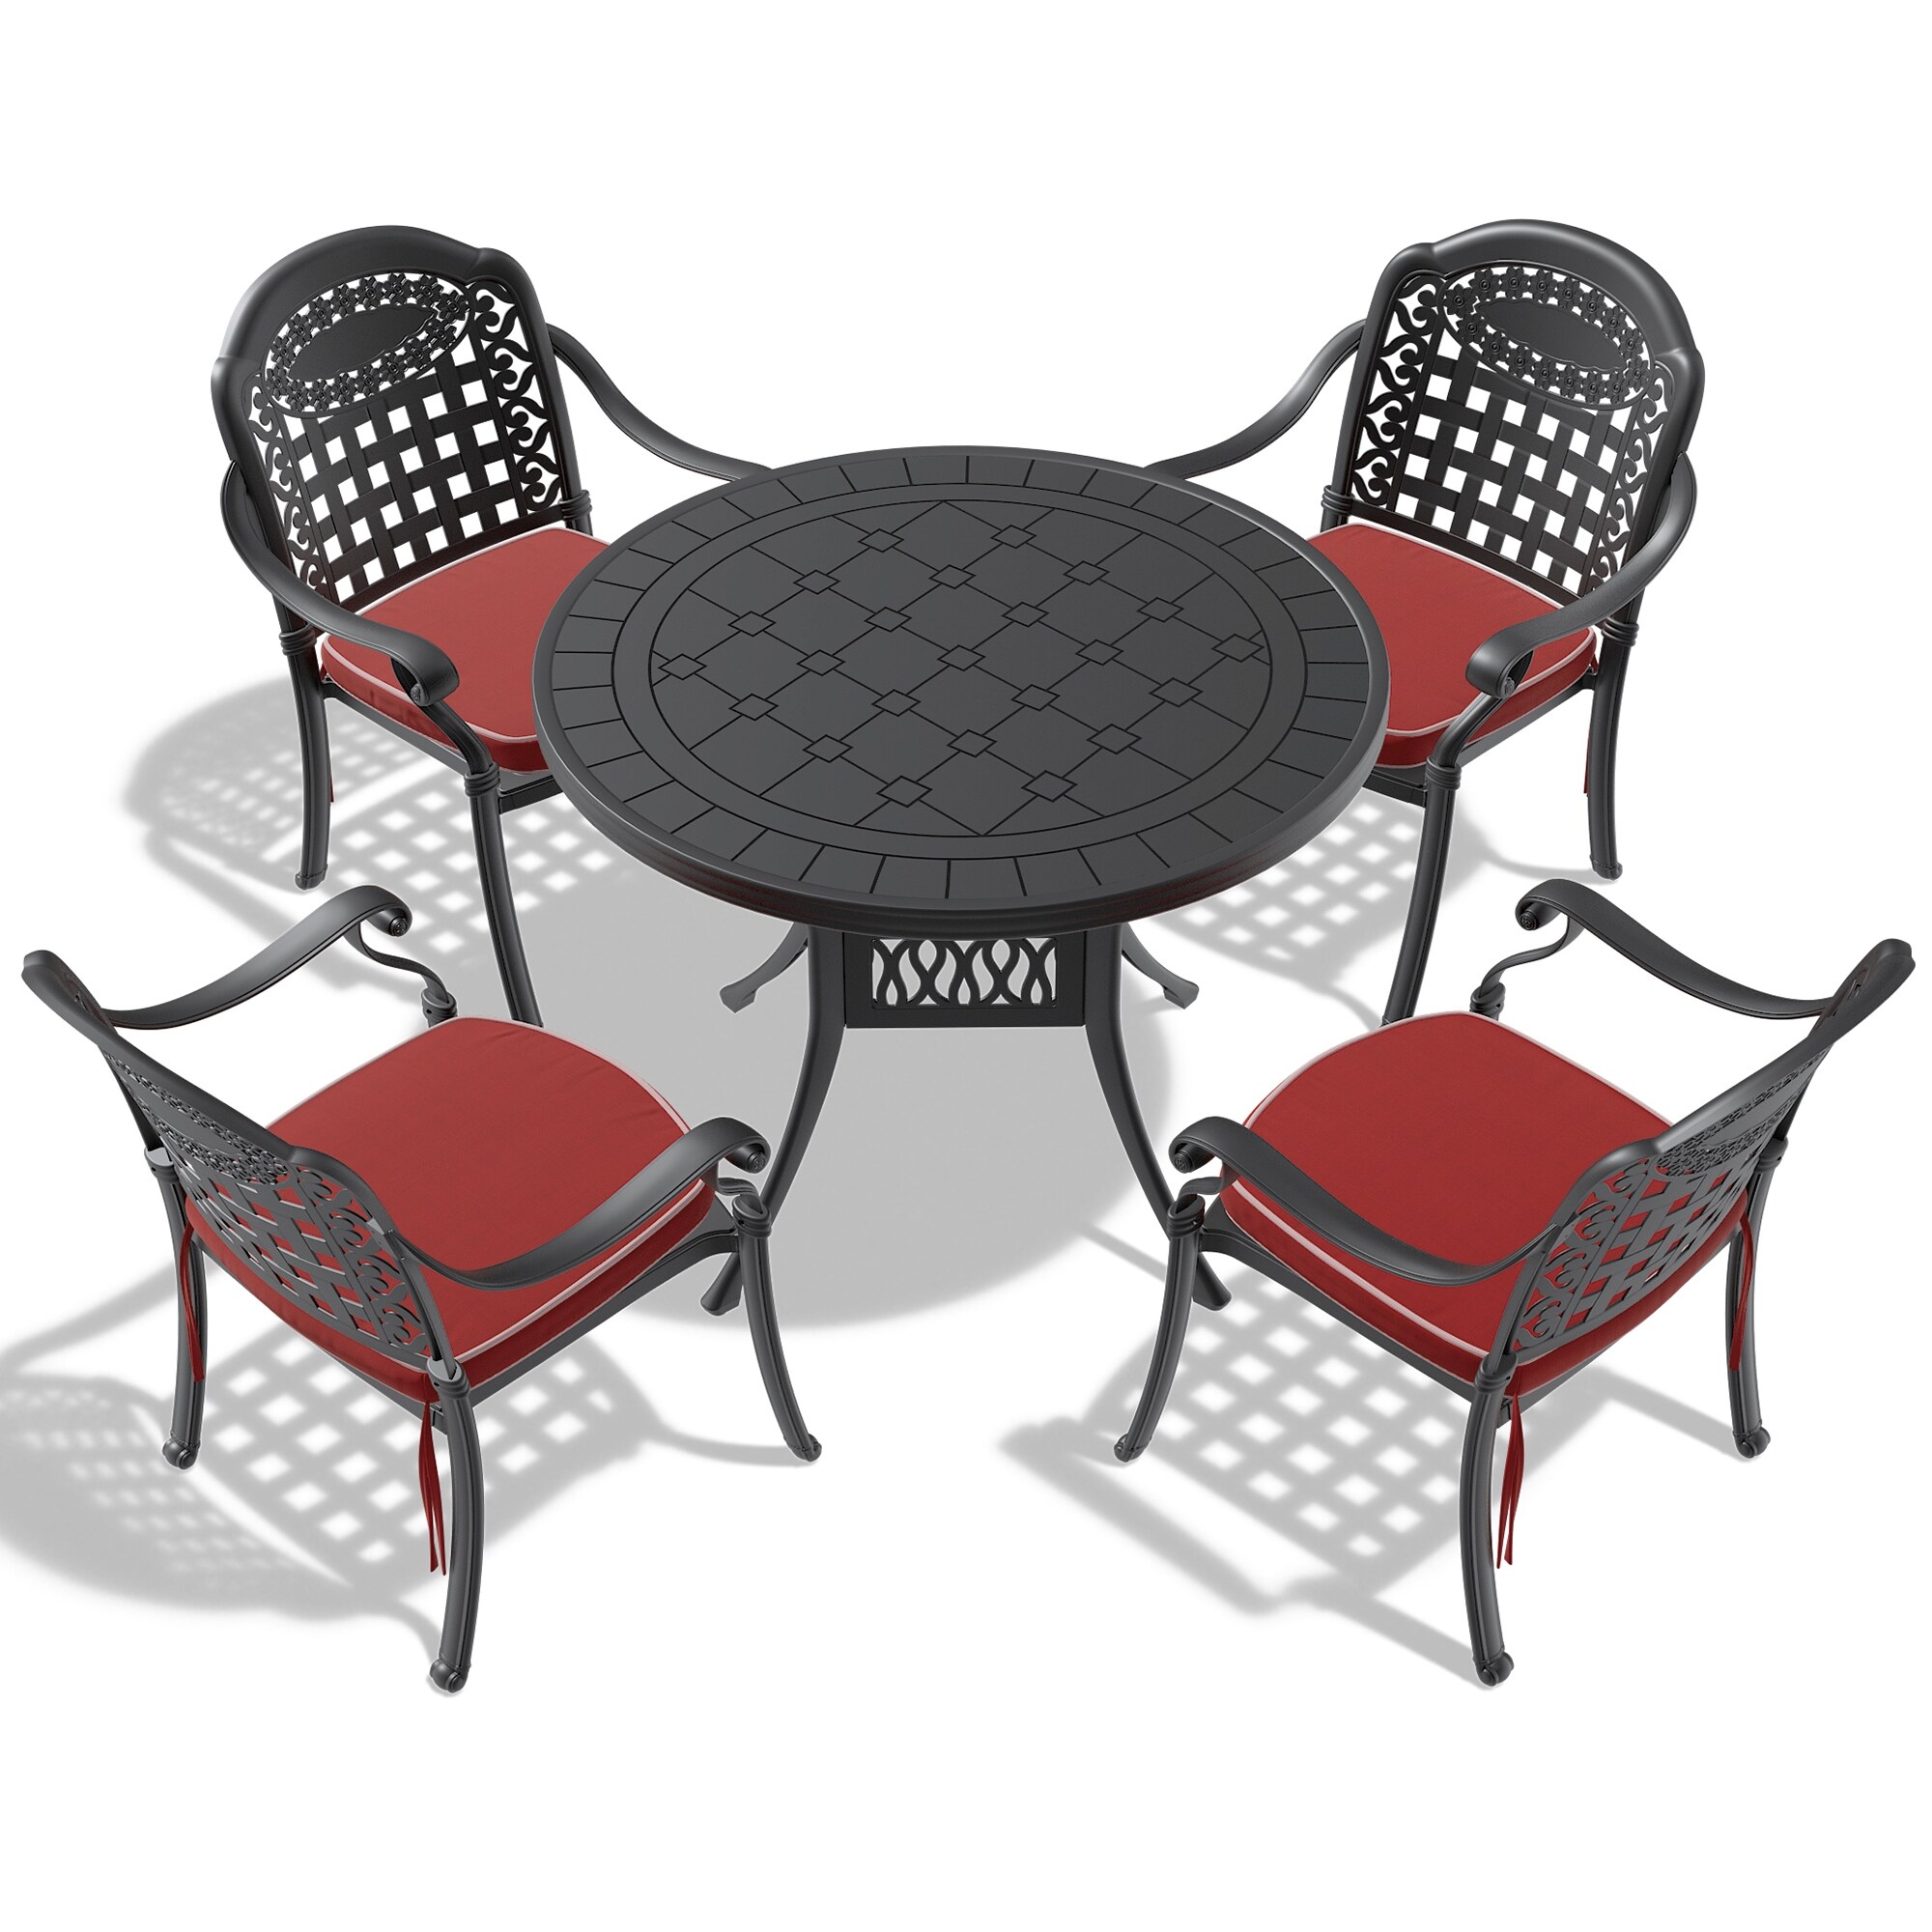 GEROJO 5-Piece Black Cast Aluminum Patio Furniture with Cushions In Random  Colors - ShopStyle Outdoor Dining Collections